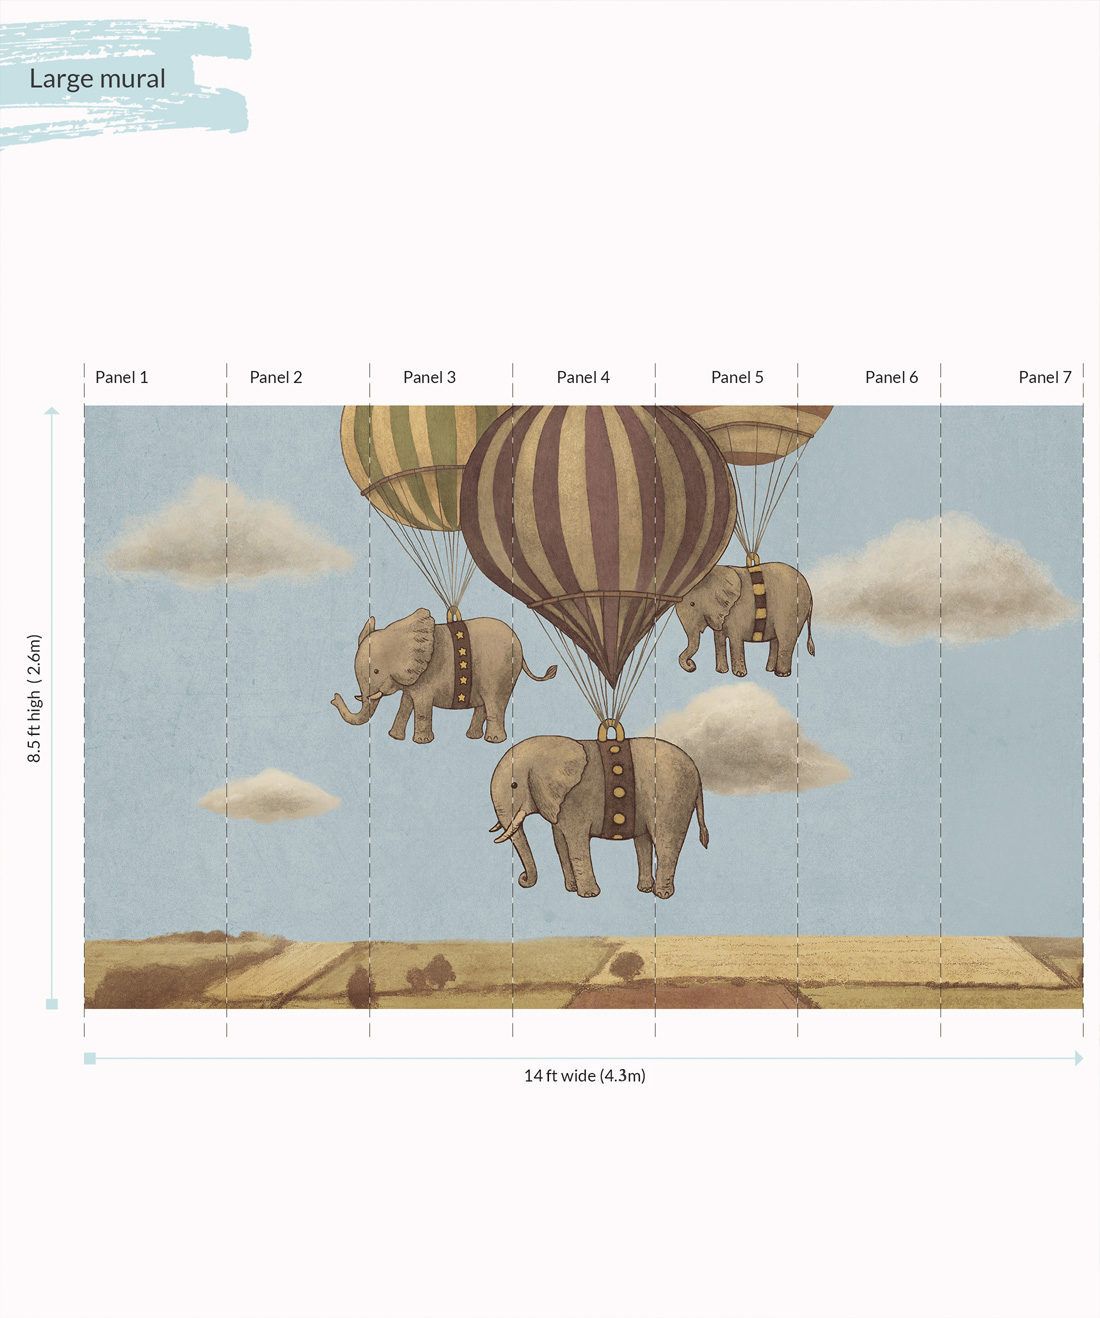 Flight of the Elephants Wall Mural - Large